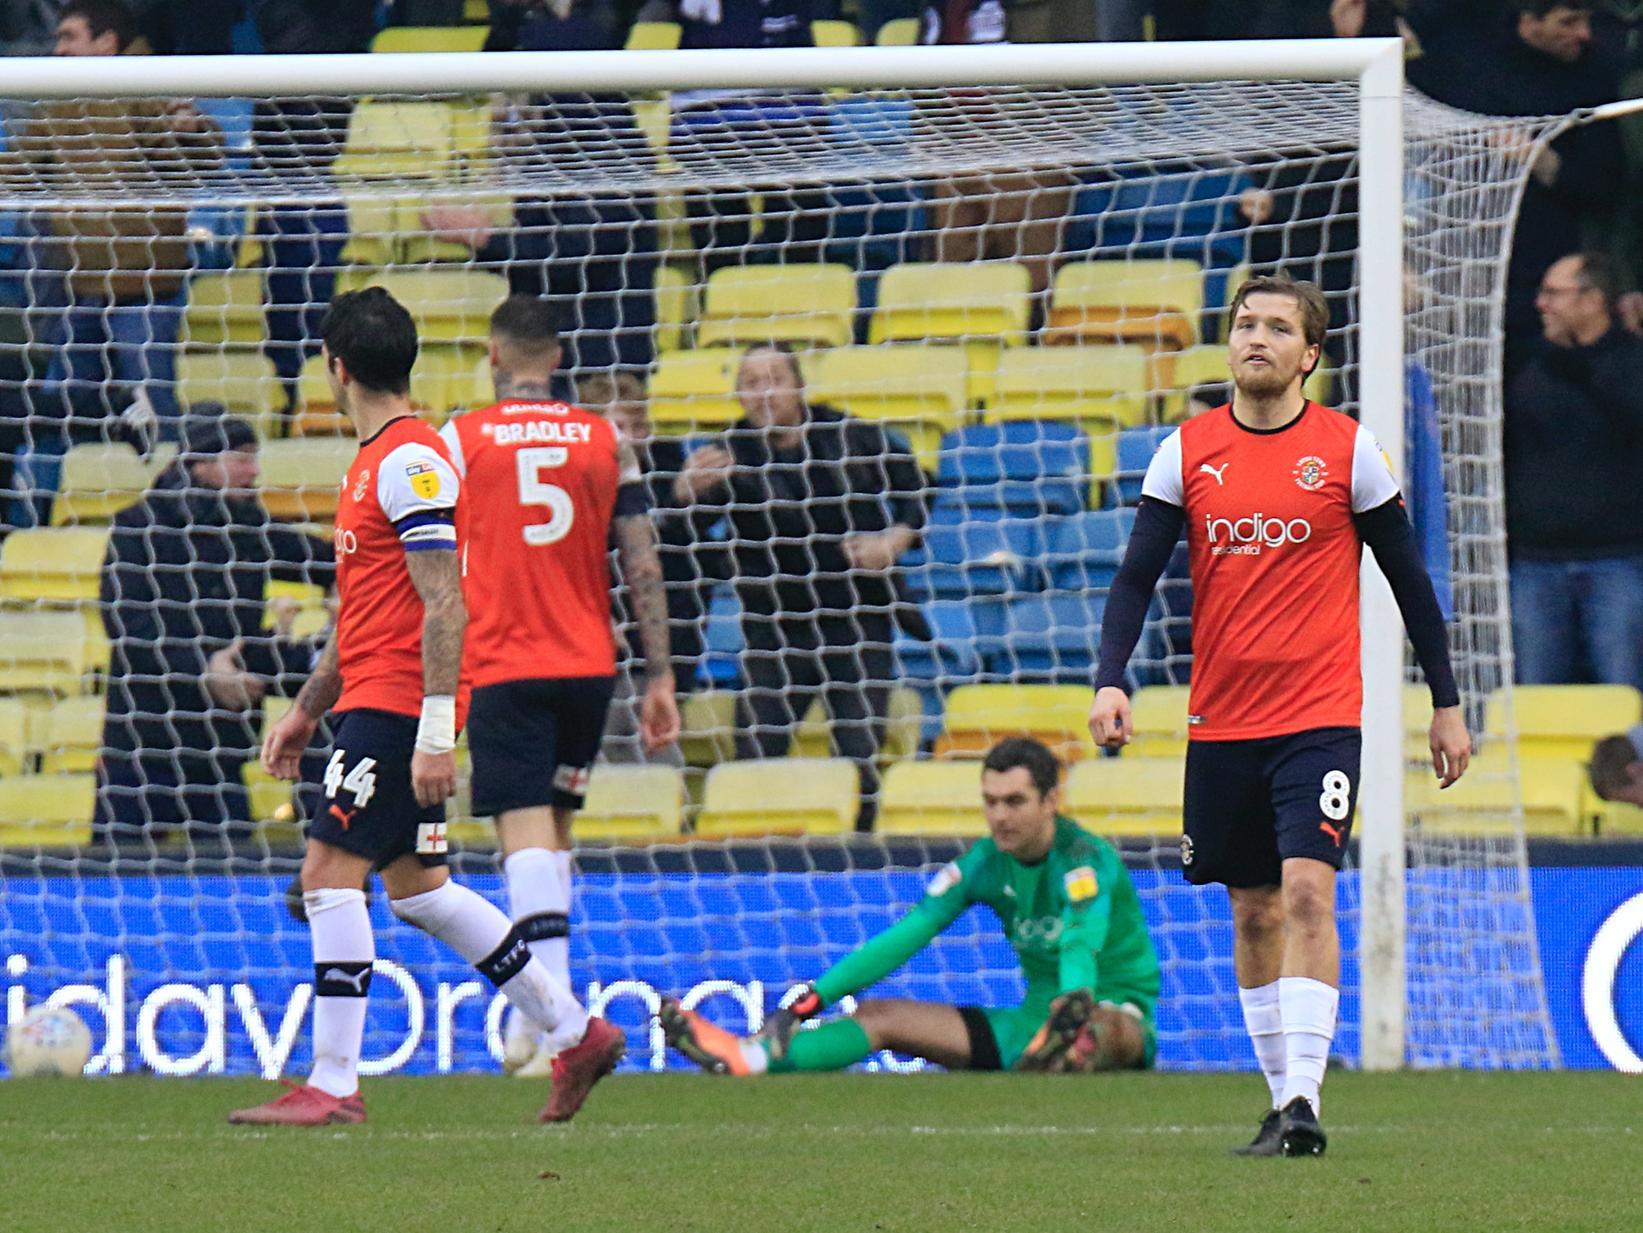 Luton concede their third goal as the Hatters are beaten 3-1 by Millwall on New Year's Day